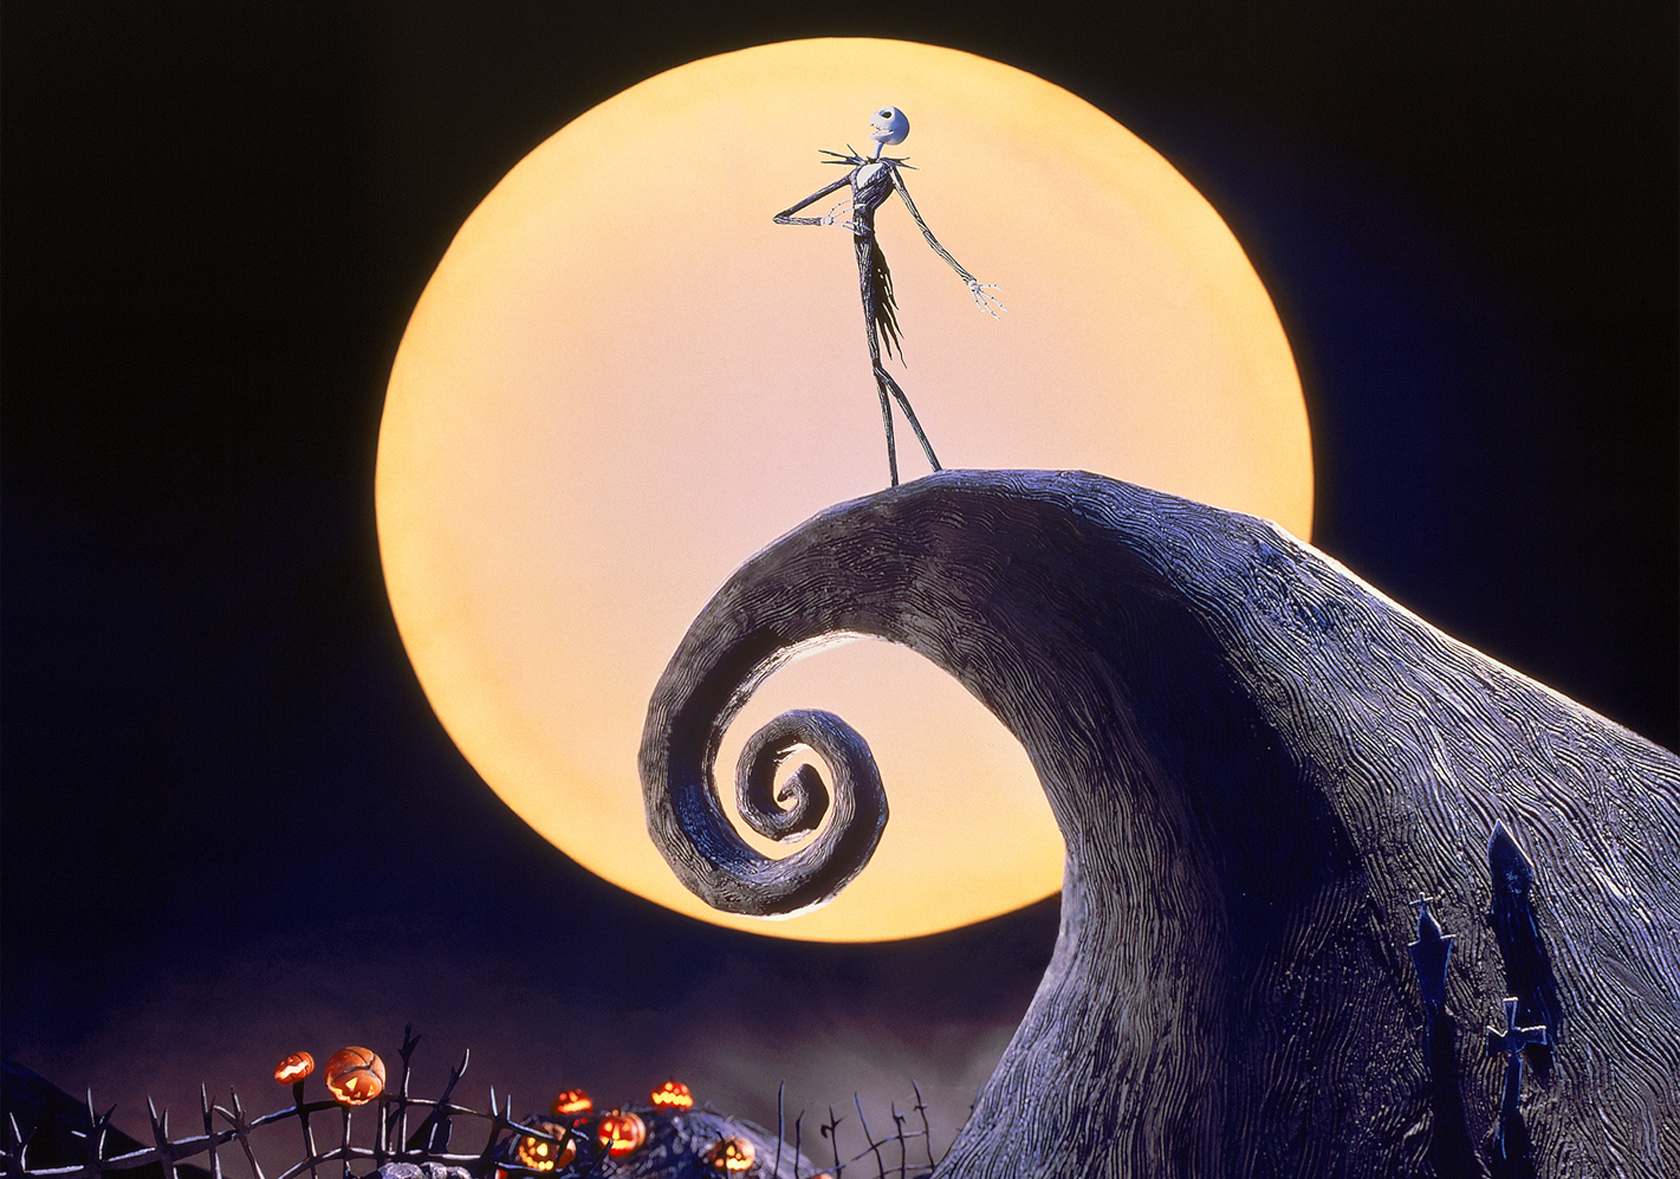 nightmare before christmas wallpaper,moon,crescent,sky,architecture,night